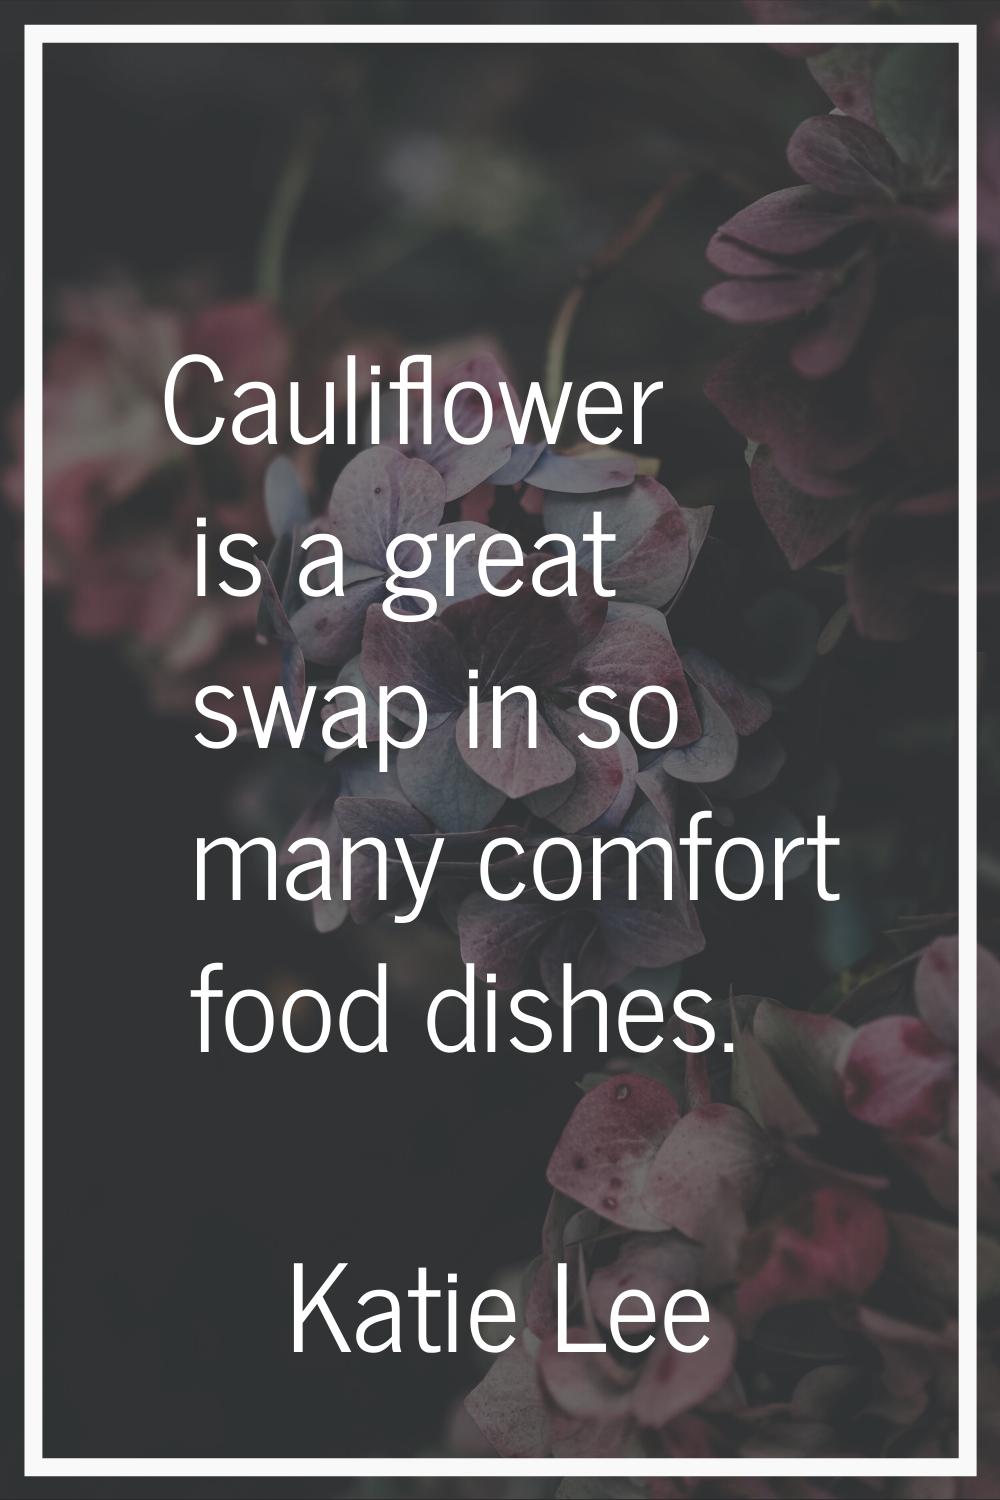 Cauliflower is a great swap in so many comfort food dishes.